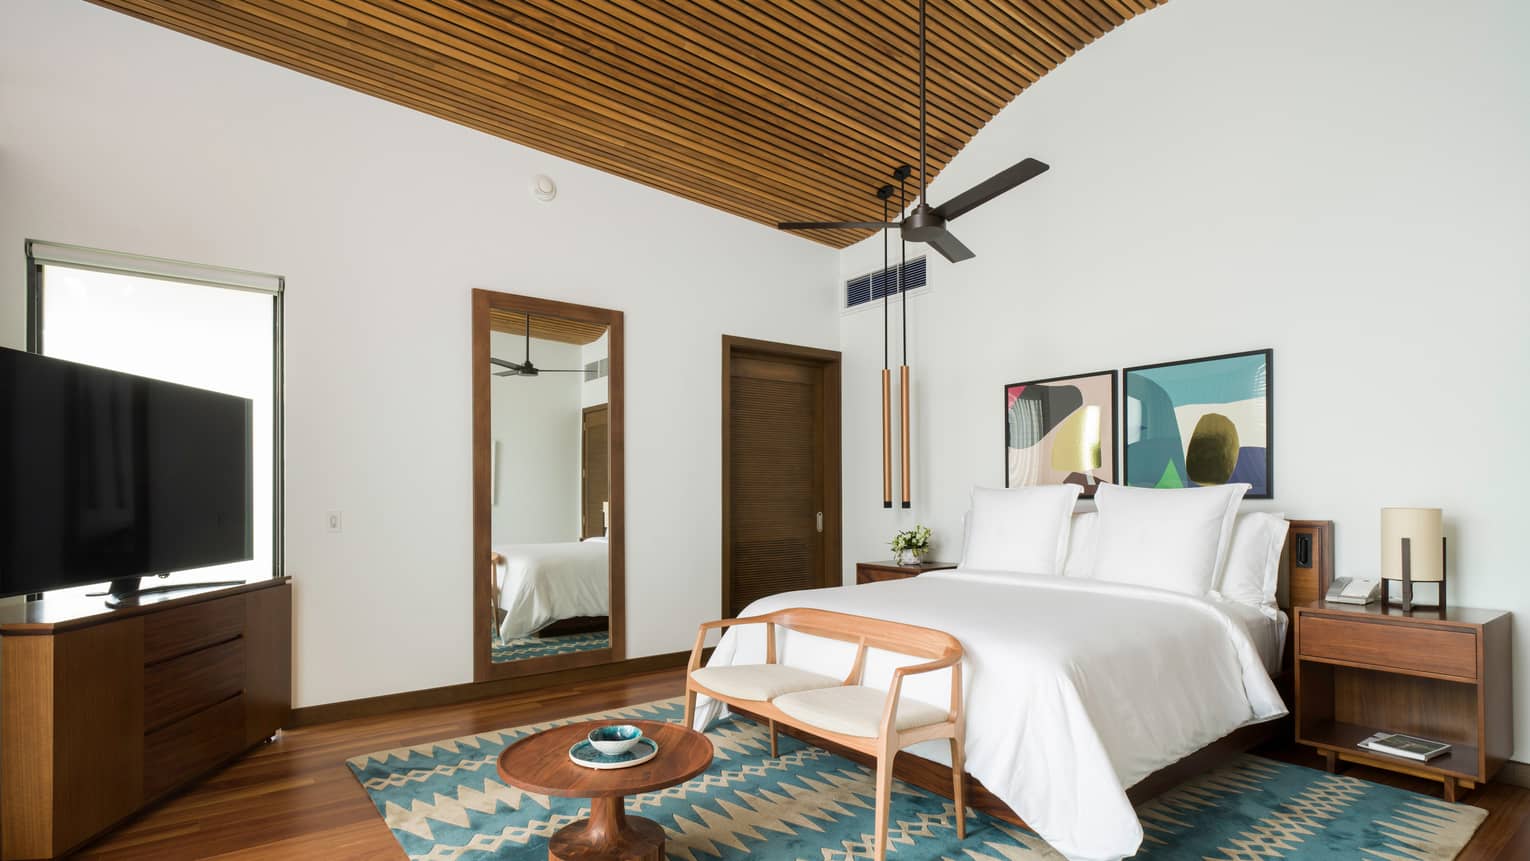 Bedroom with king bed, wooden ceiling, ceiling fan